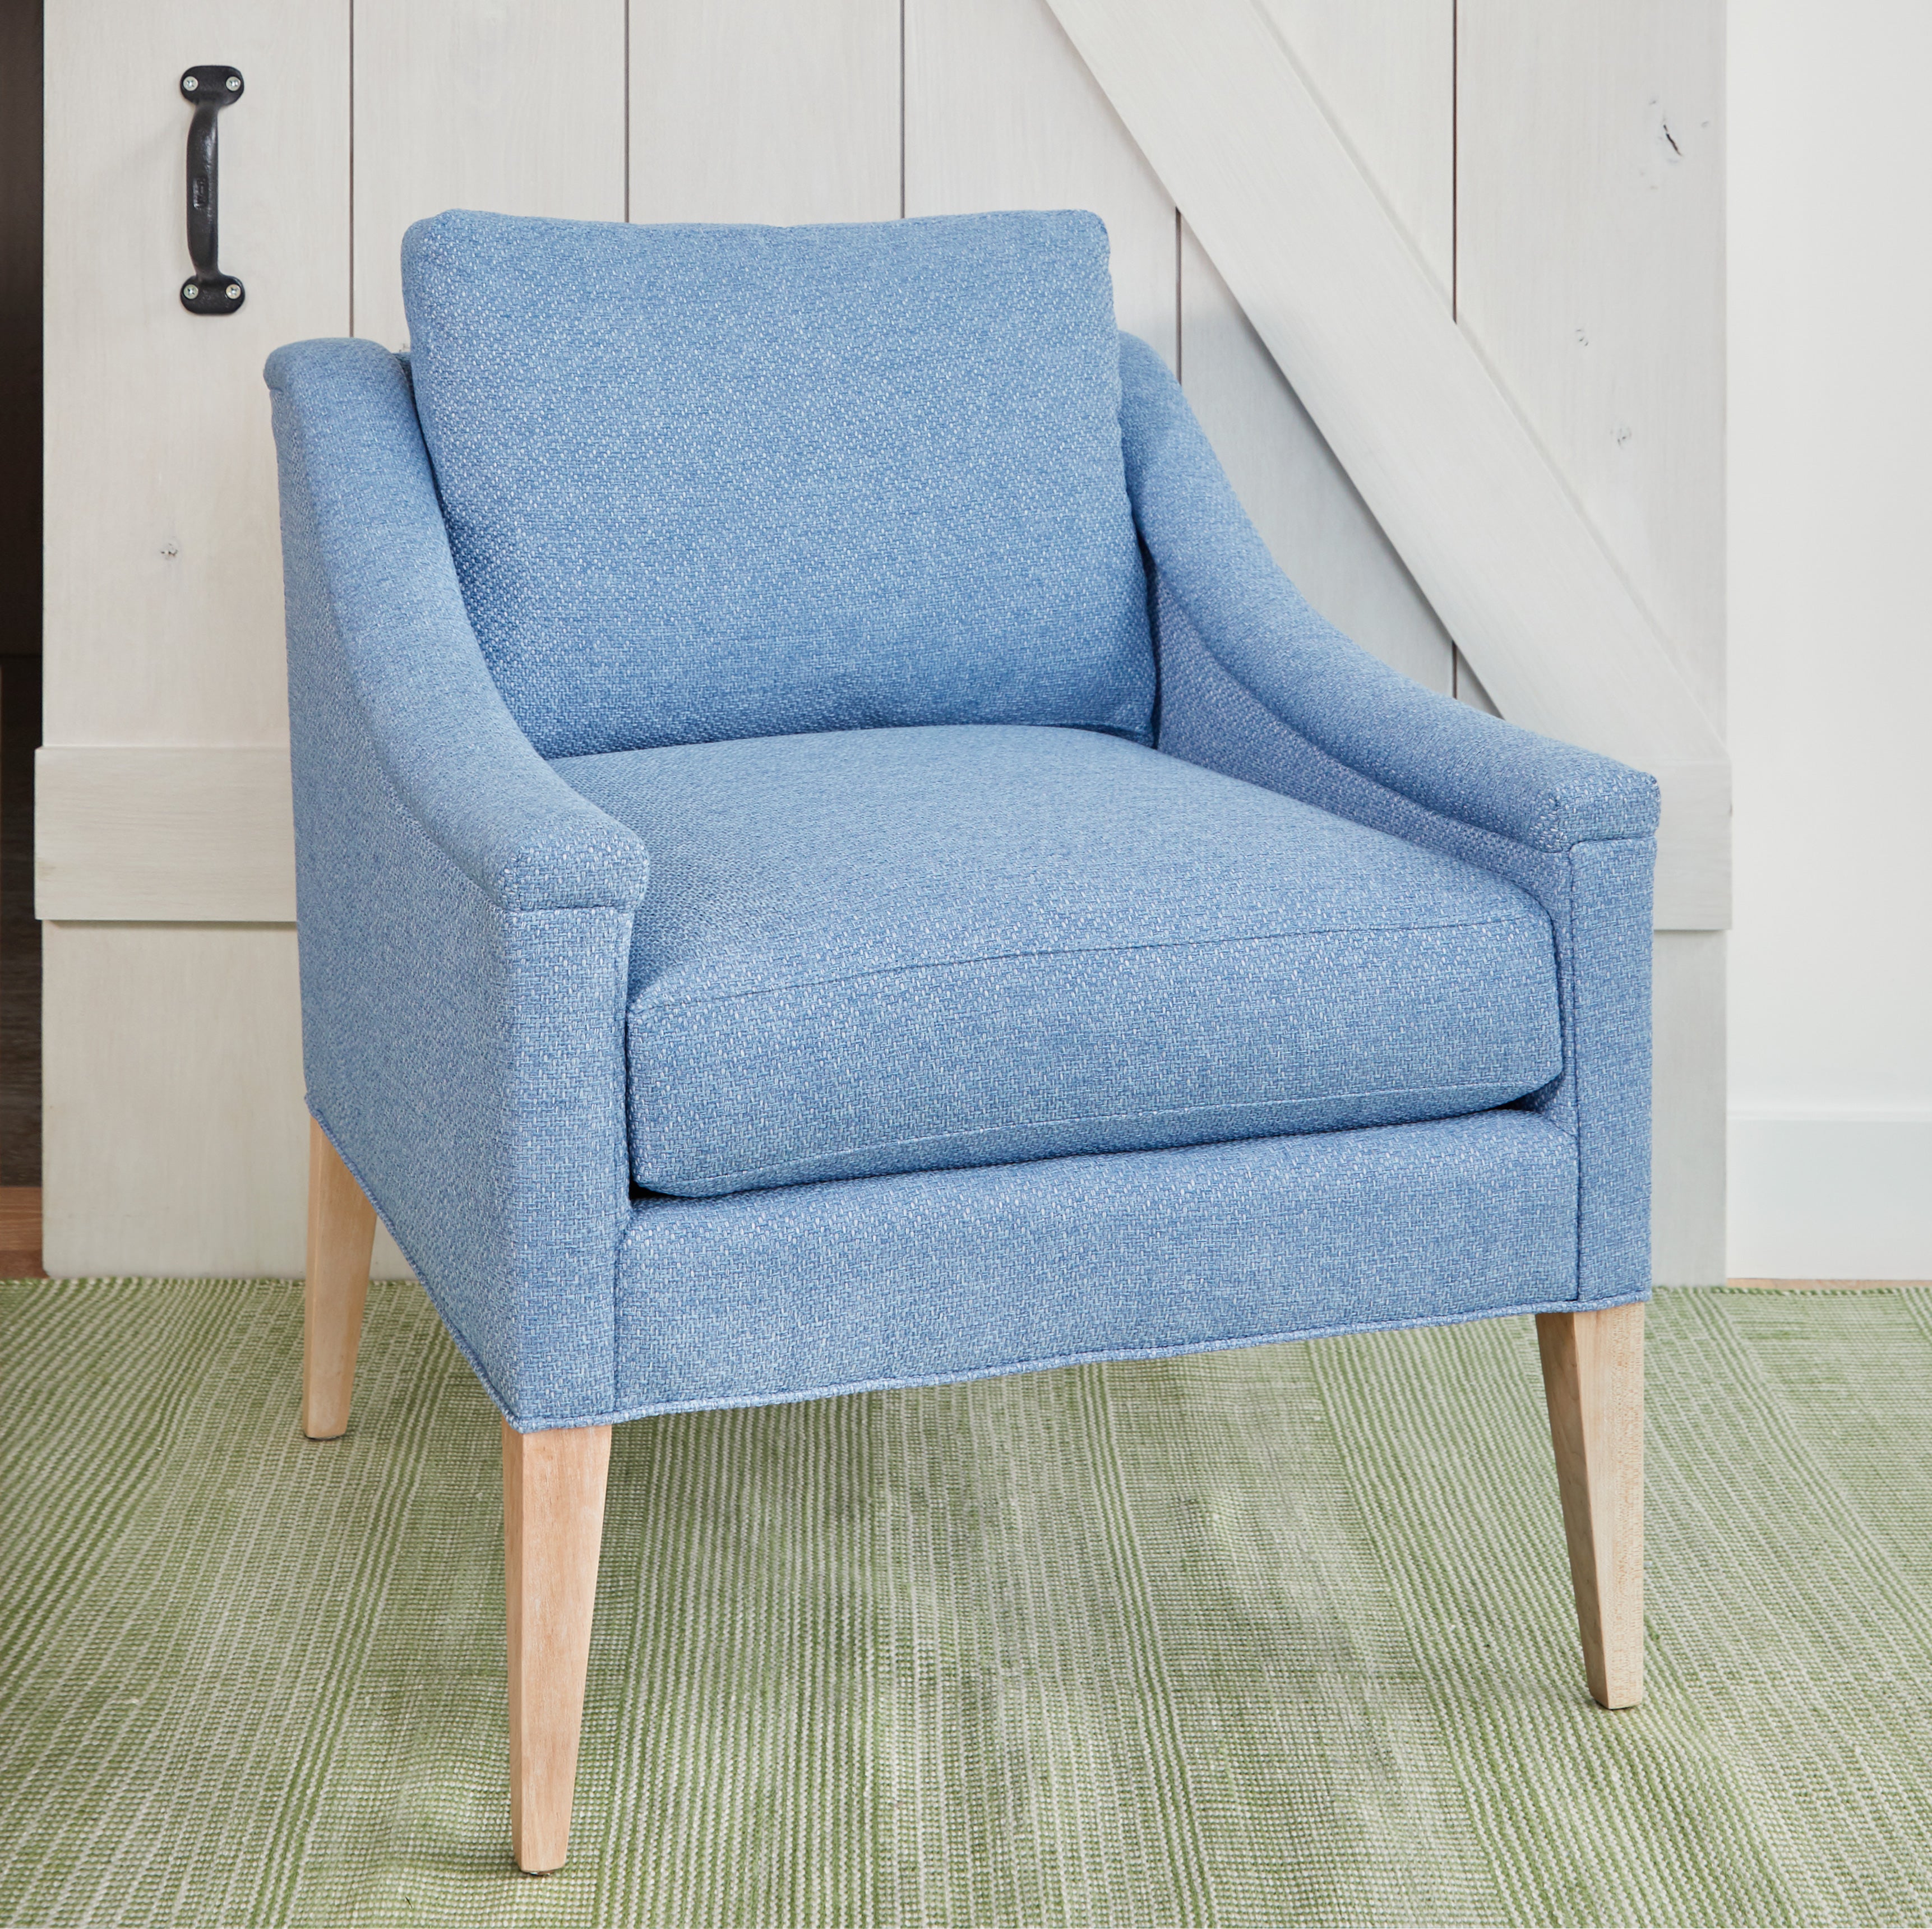 Maine Cottage Quinn Chair  | Upholstered Chairs | Maine Cottage® 